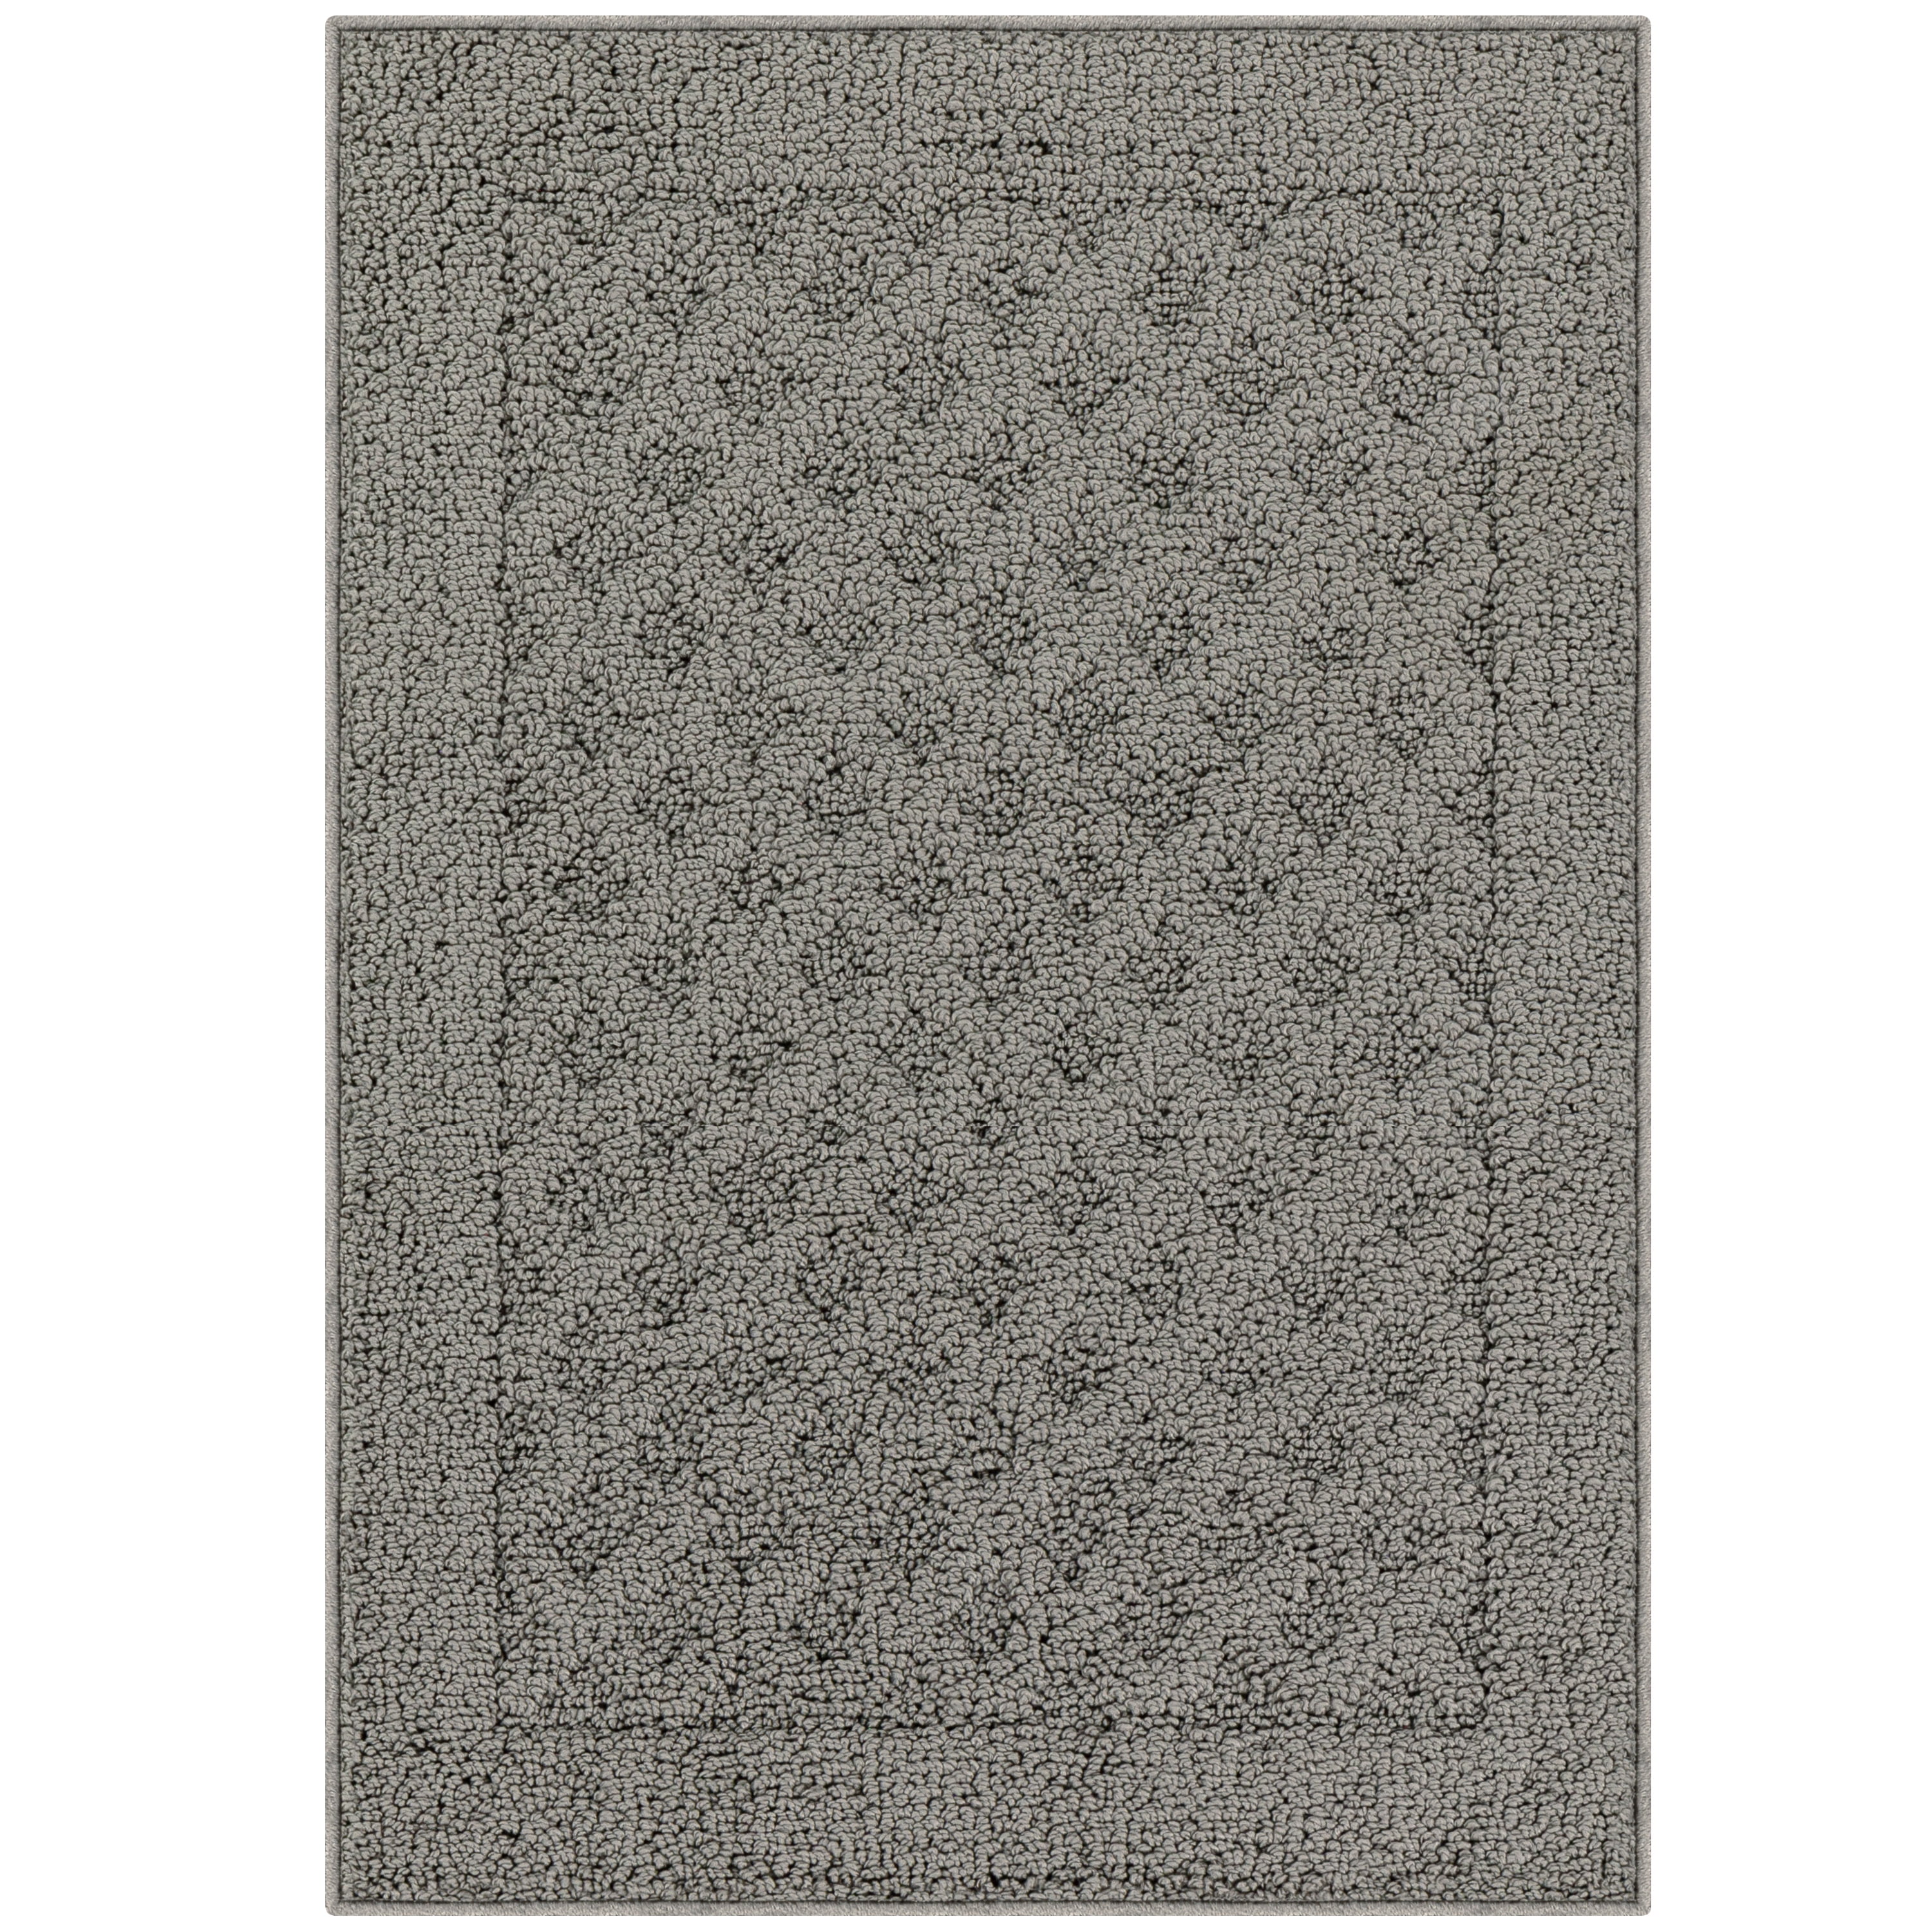 Mainstays Dylan Solid Diamond Traditional Pewter Area Rug, 1'8"x2'6"